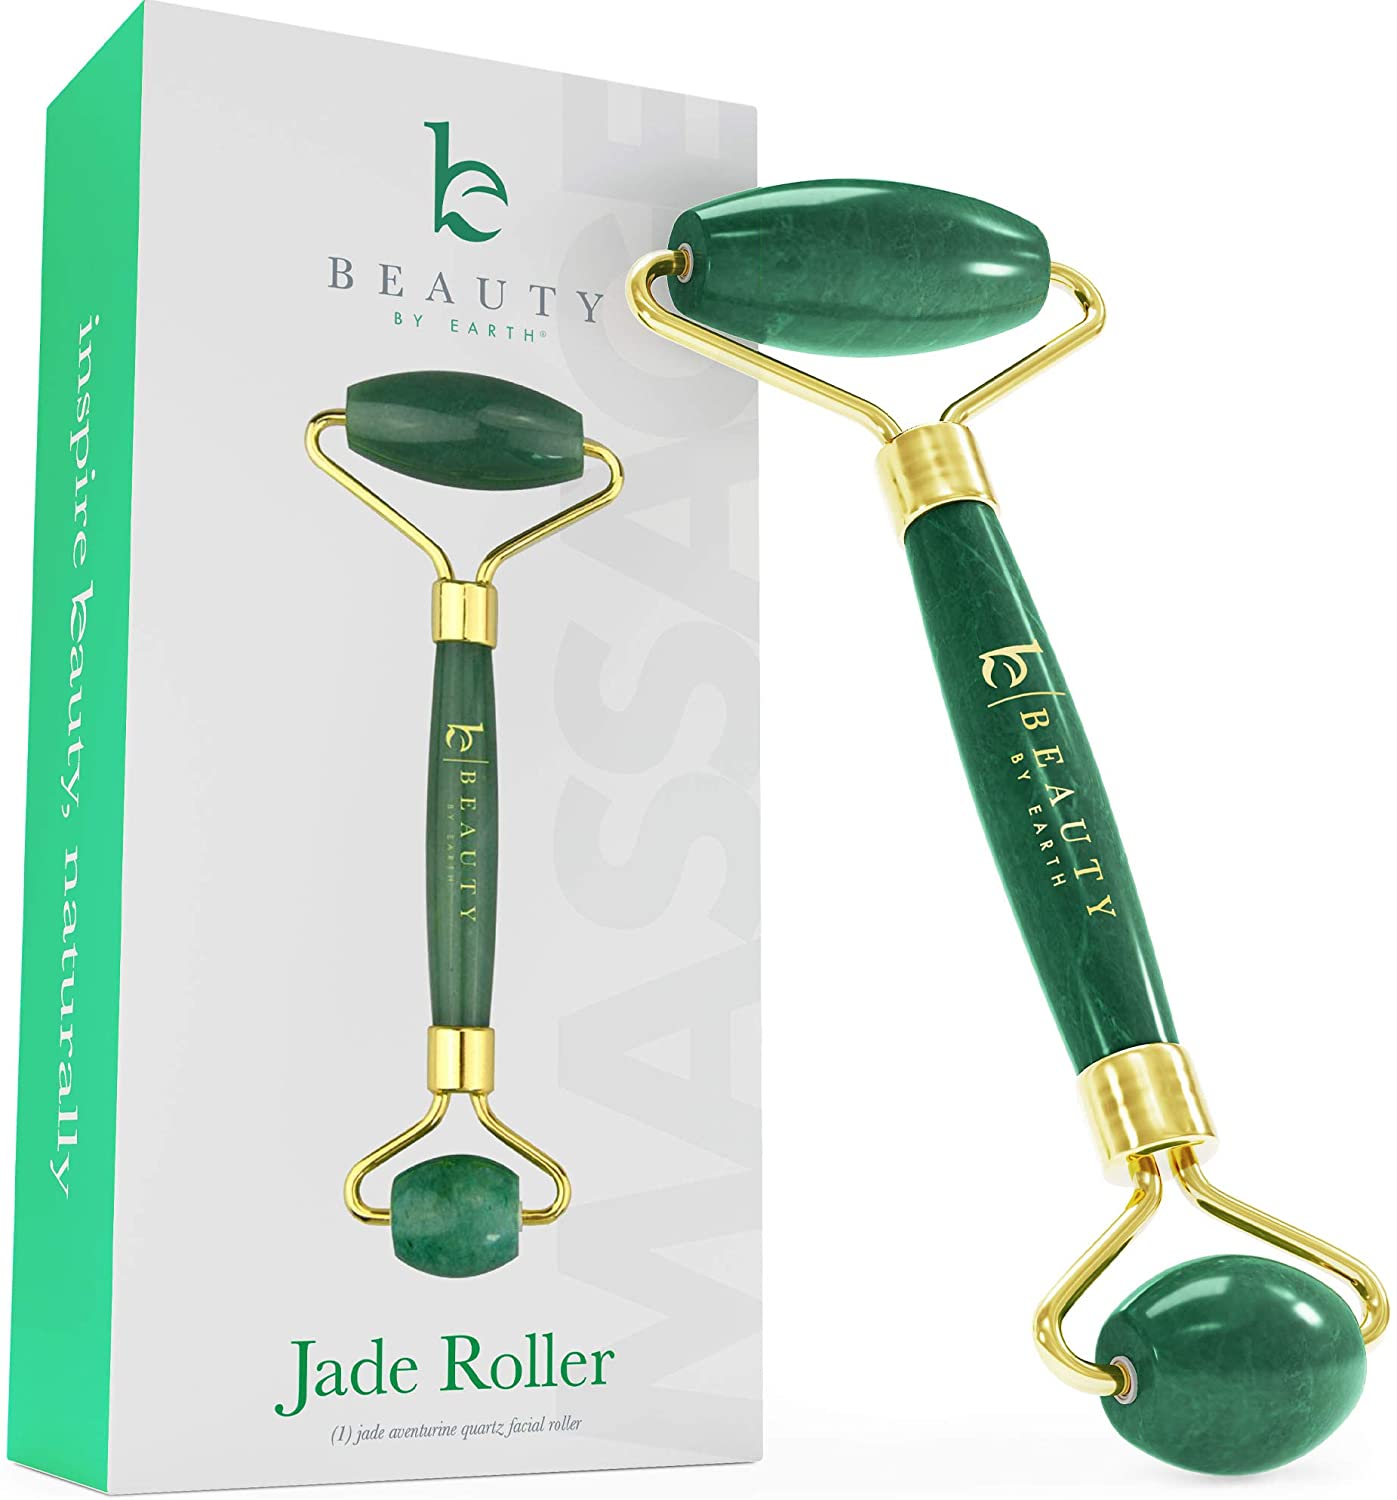 Jade Roller for Face - Face & Neck Massager for Skin Care, Facial Roller to Press Serums, Cream and Oil Into Skin, Lymphatic Drainage Massager Skin Care Tool, Eye Massager and Neck Roller (1 